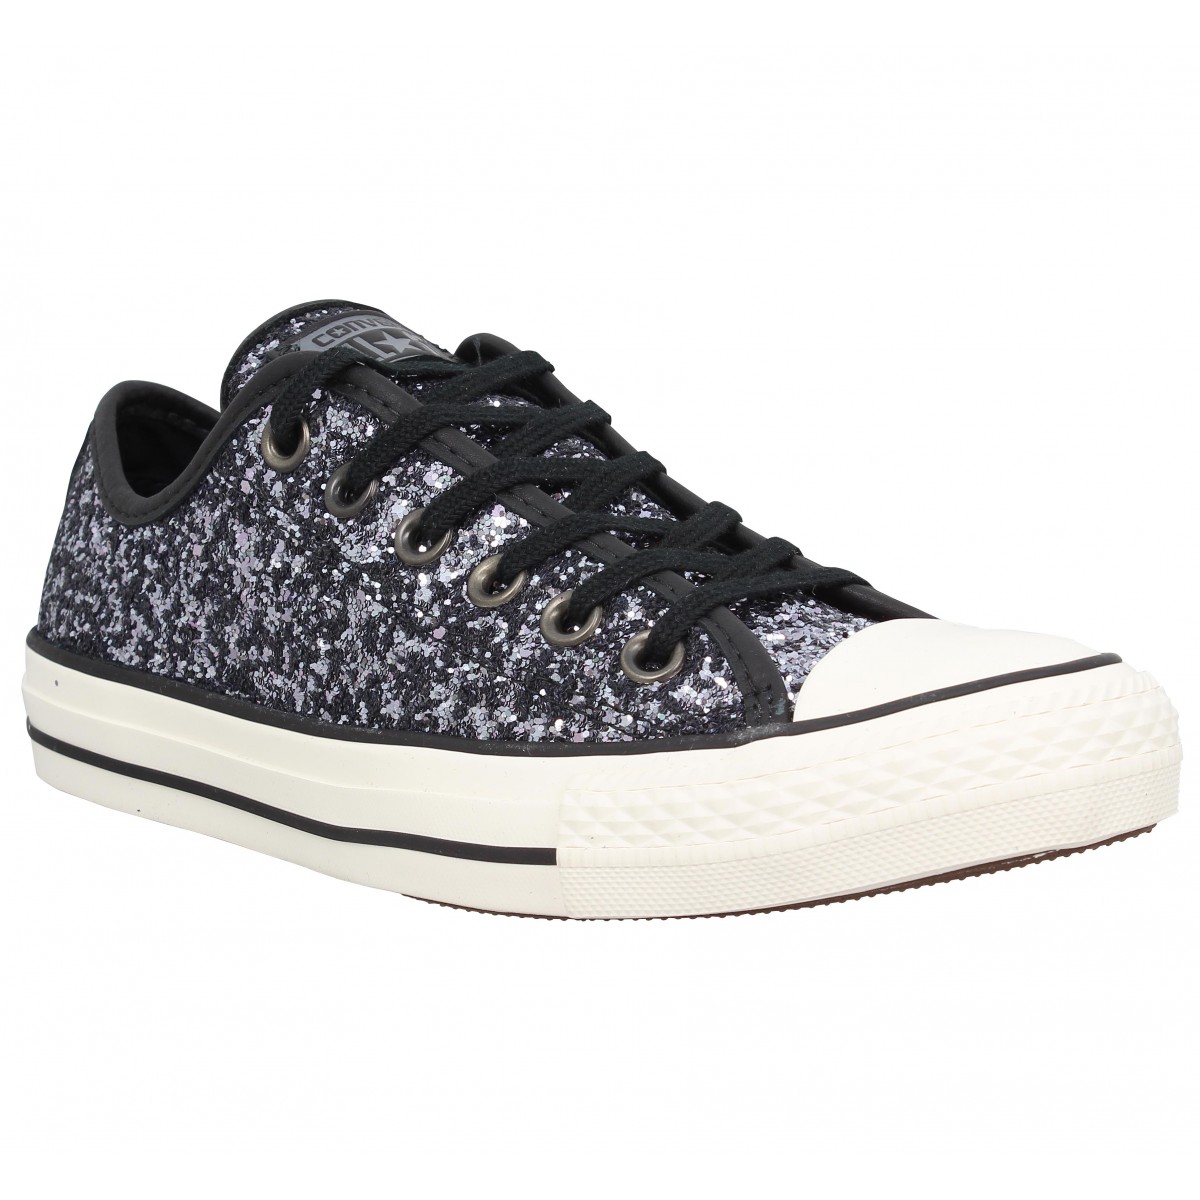 converse chuck taylor all star paillettes